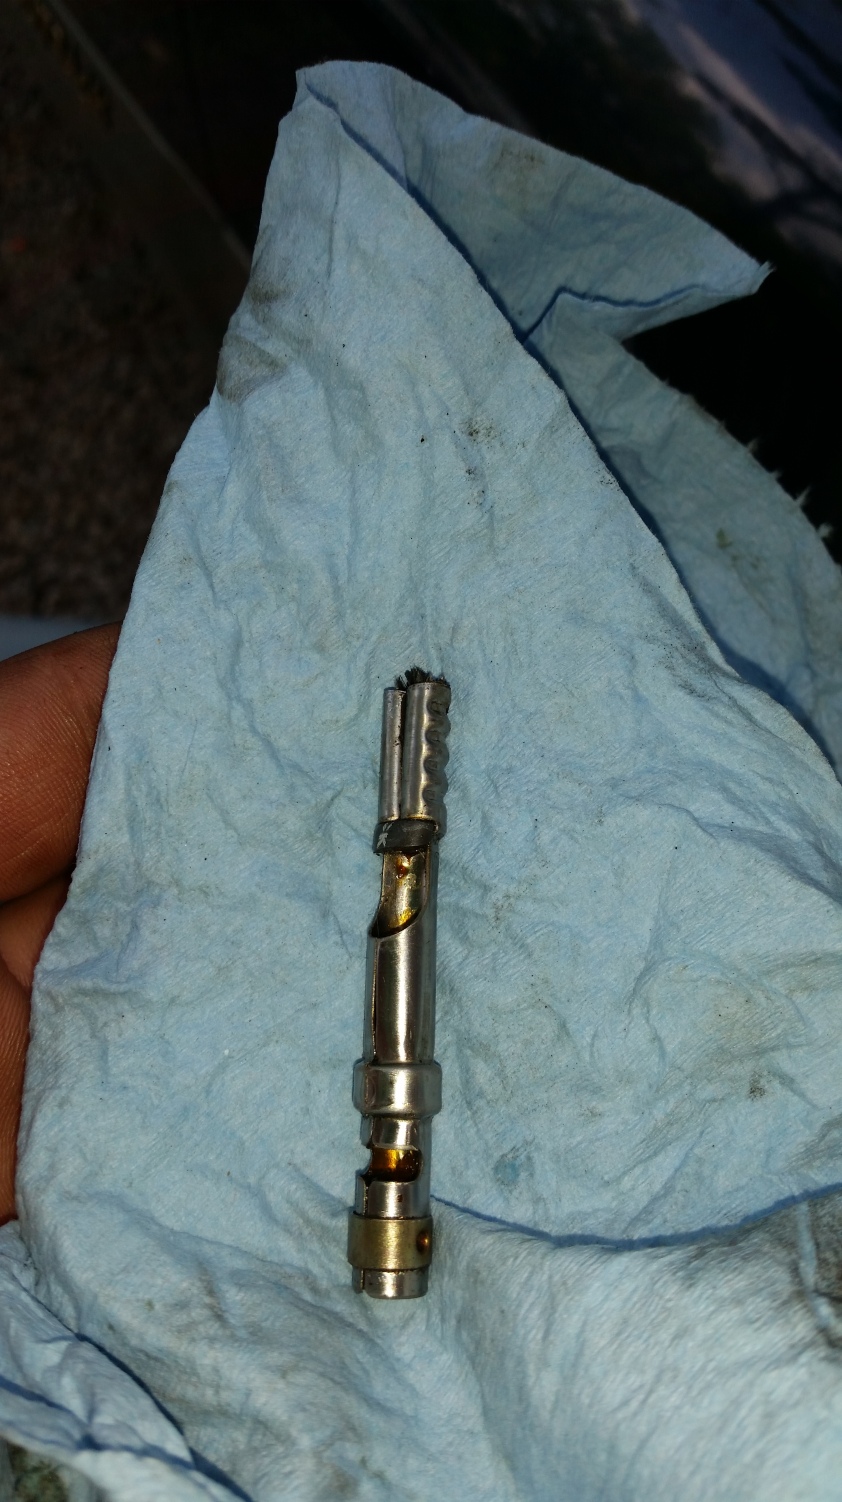 The internal part of the spark plug wire, I am sure it wasn't great for the engine to have one cylinder with such an intermittent connection